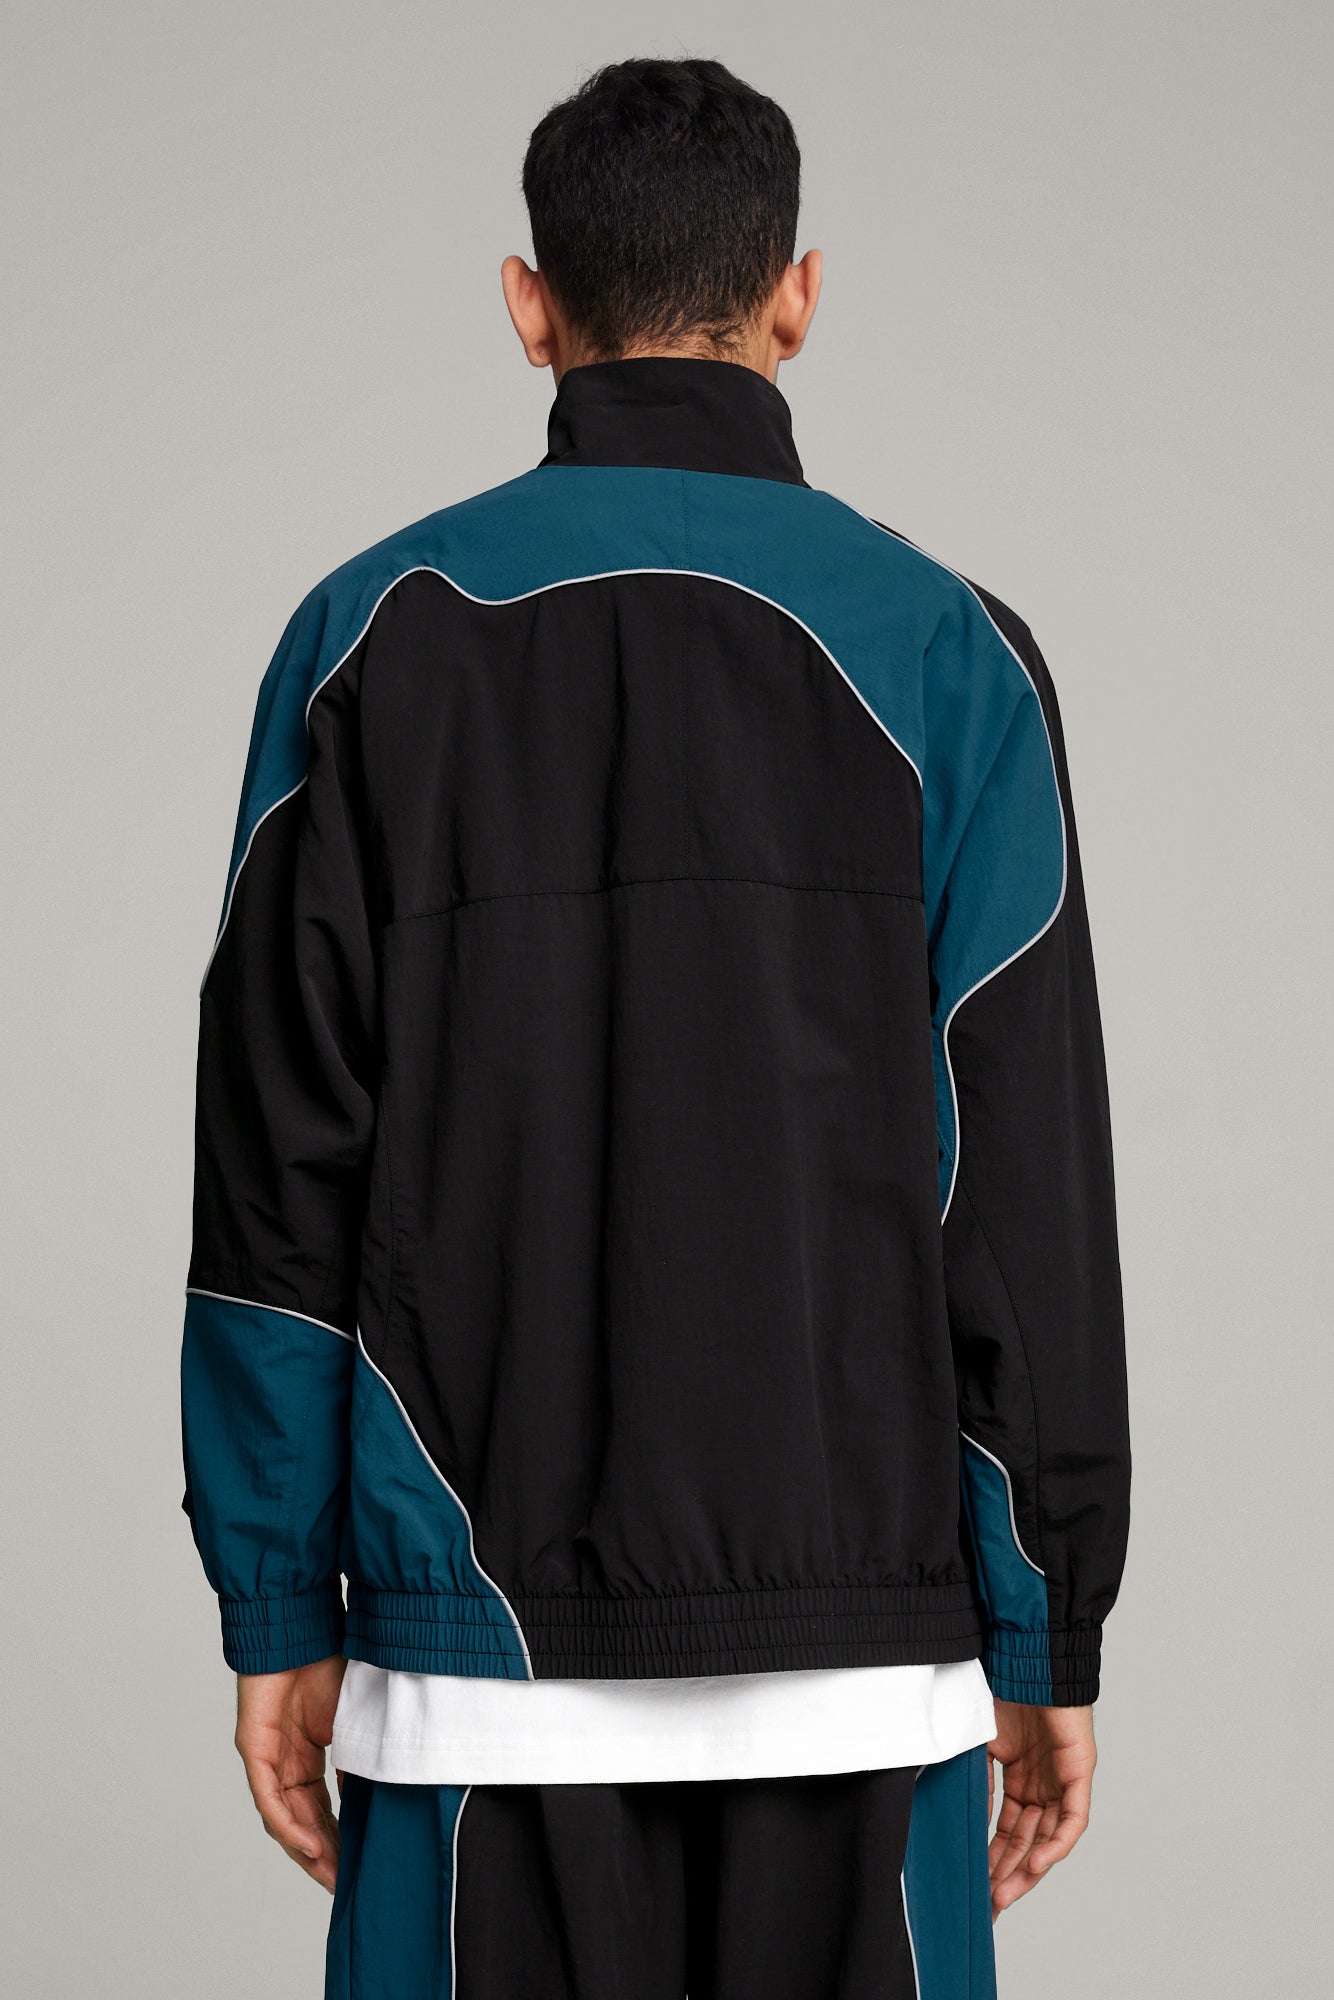 The PUMA X P.A.M. CELLERATOR TRACK JACKET  available online with global shipping, and in PAM Stores Melbourne and Sydney.